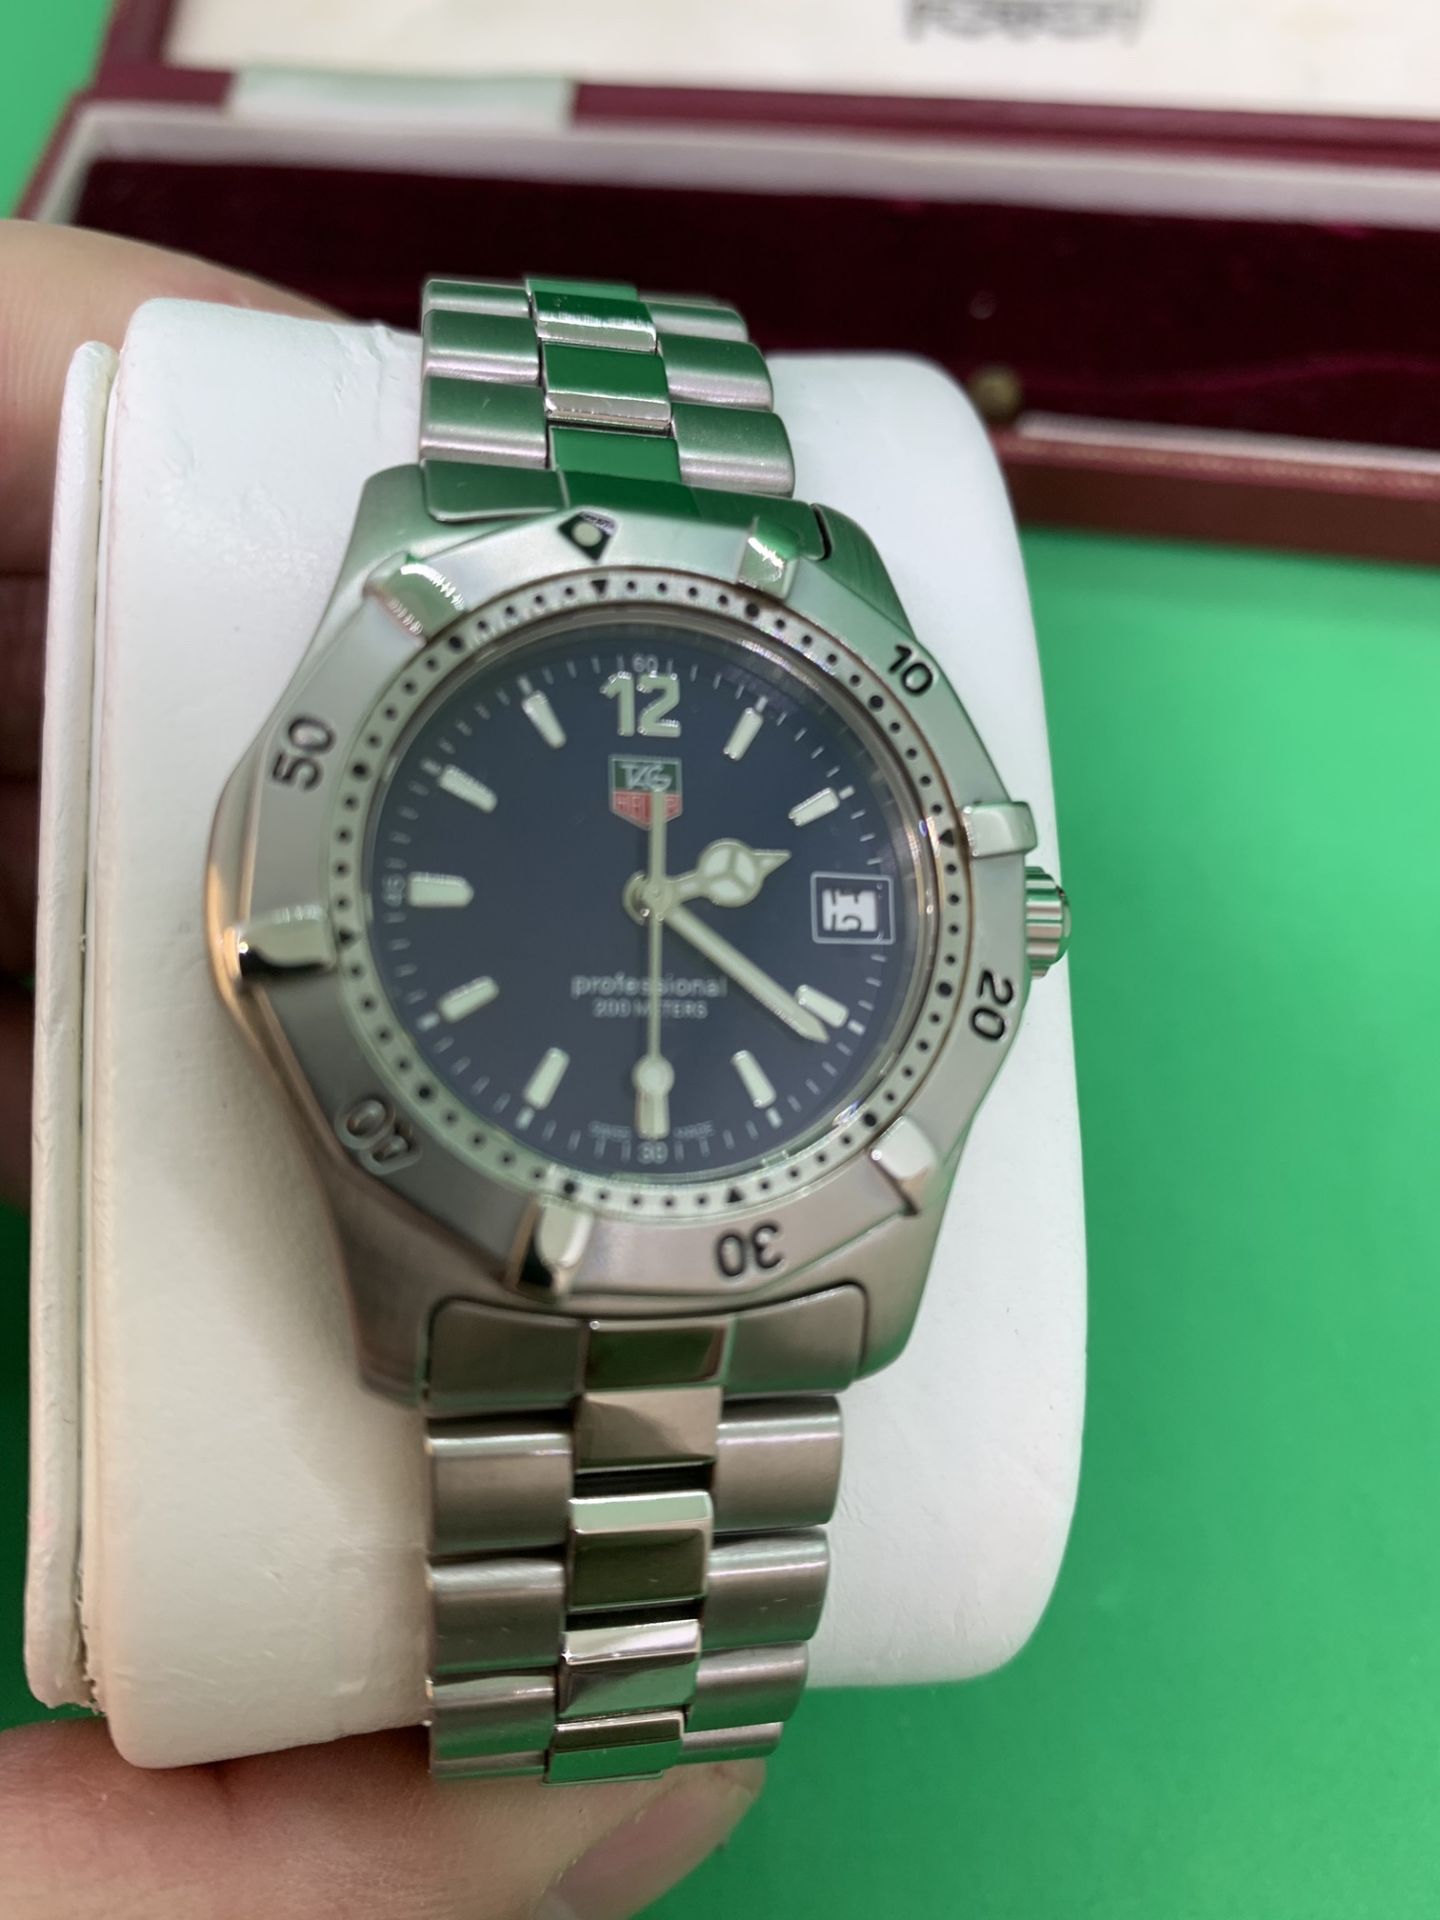 TAG HEUER WATCH STAINLESS STEEL WATCH - Image 4 of 7